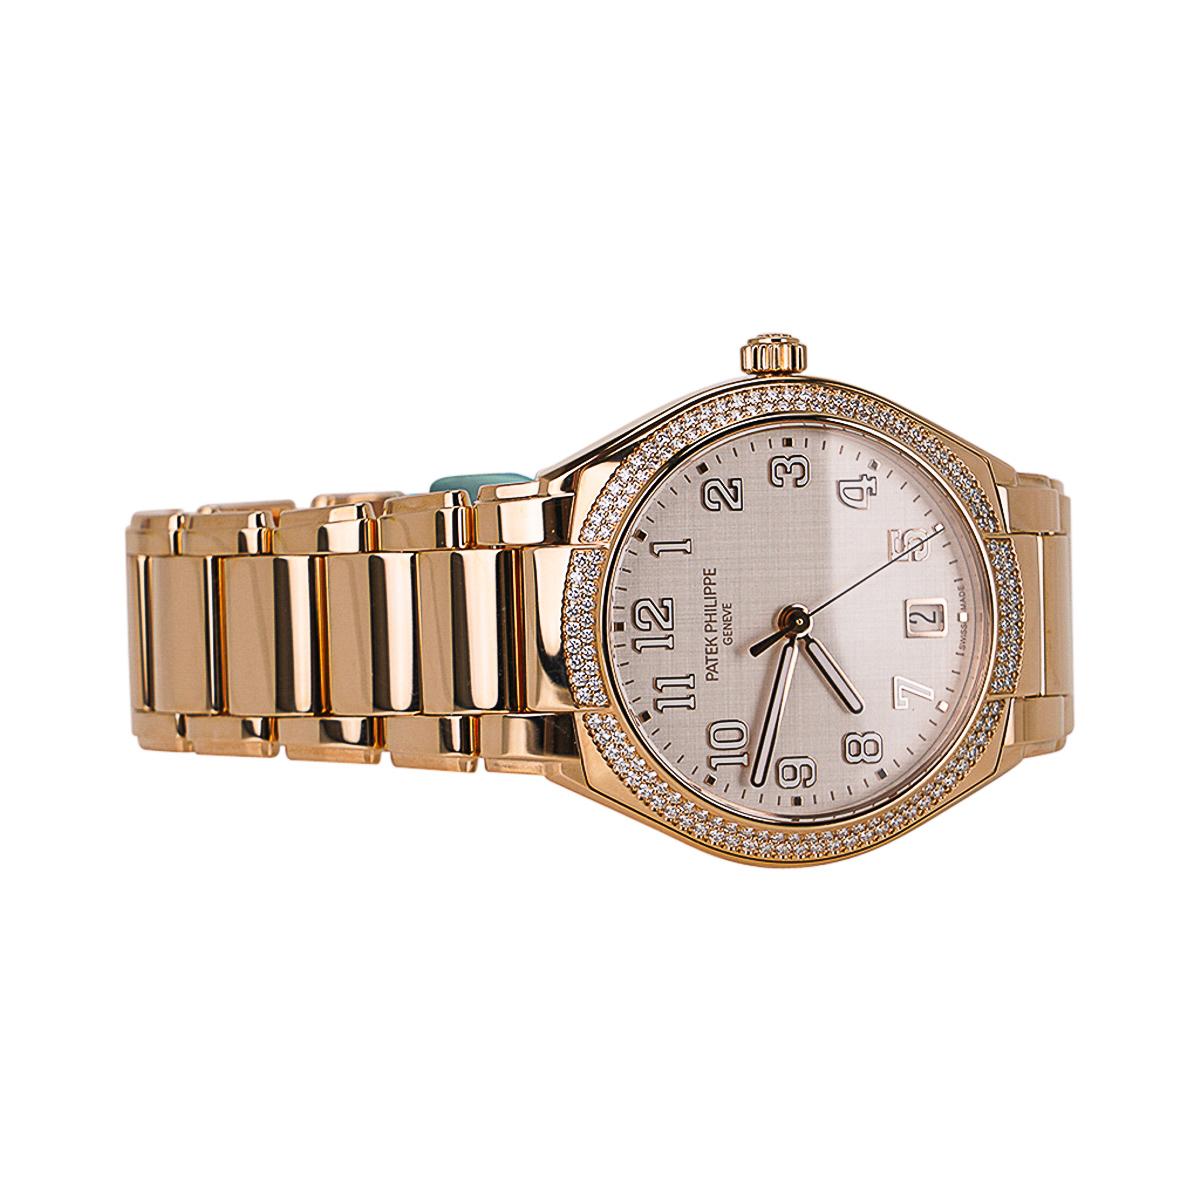 Timeless elegance.
Mightychic offers a Patek Philippe 7300/1200R TWENTY~4 ladies' watch in Rose Gold.
The first watch in the TWENTY~4 collection to feature a round case.
160 diamond bezel - 0.77ct.
Silvery dial with satin finish reminiscent of